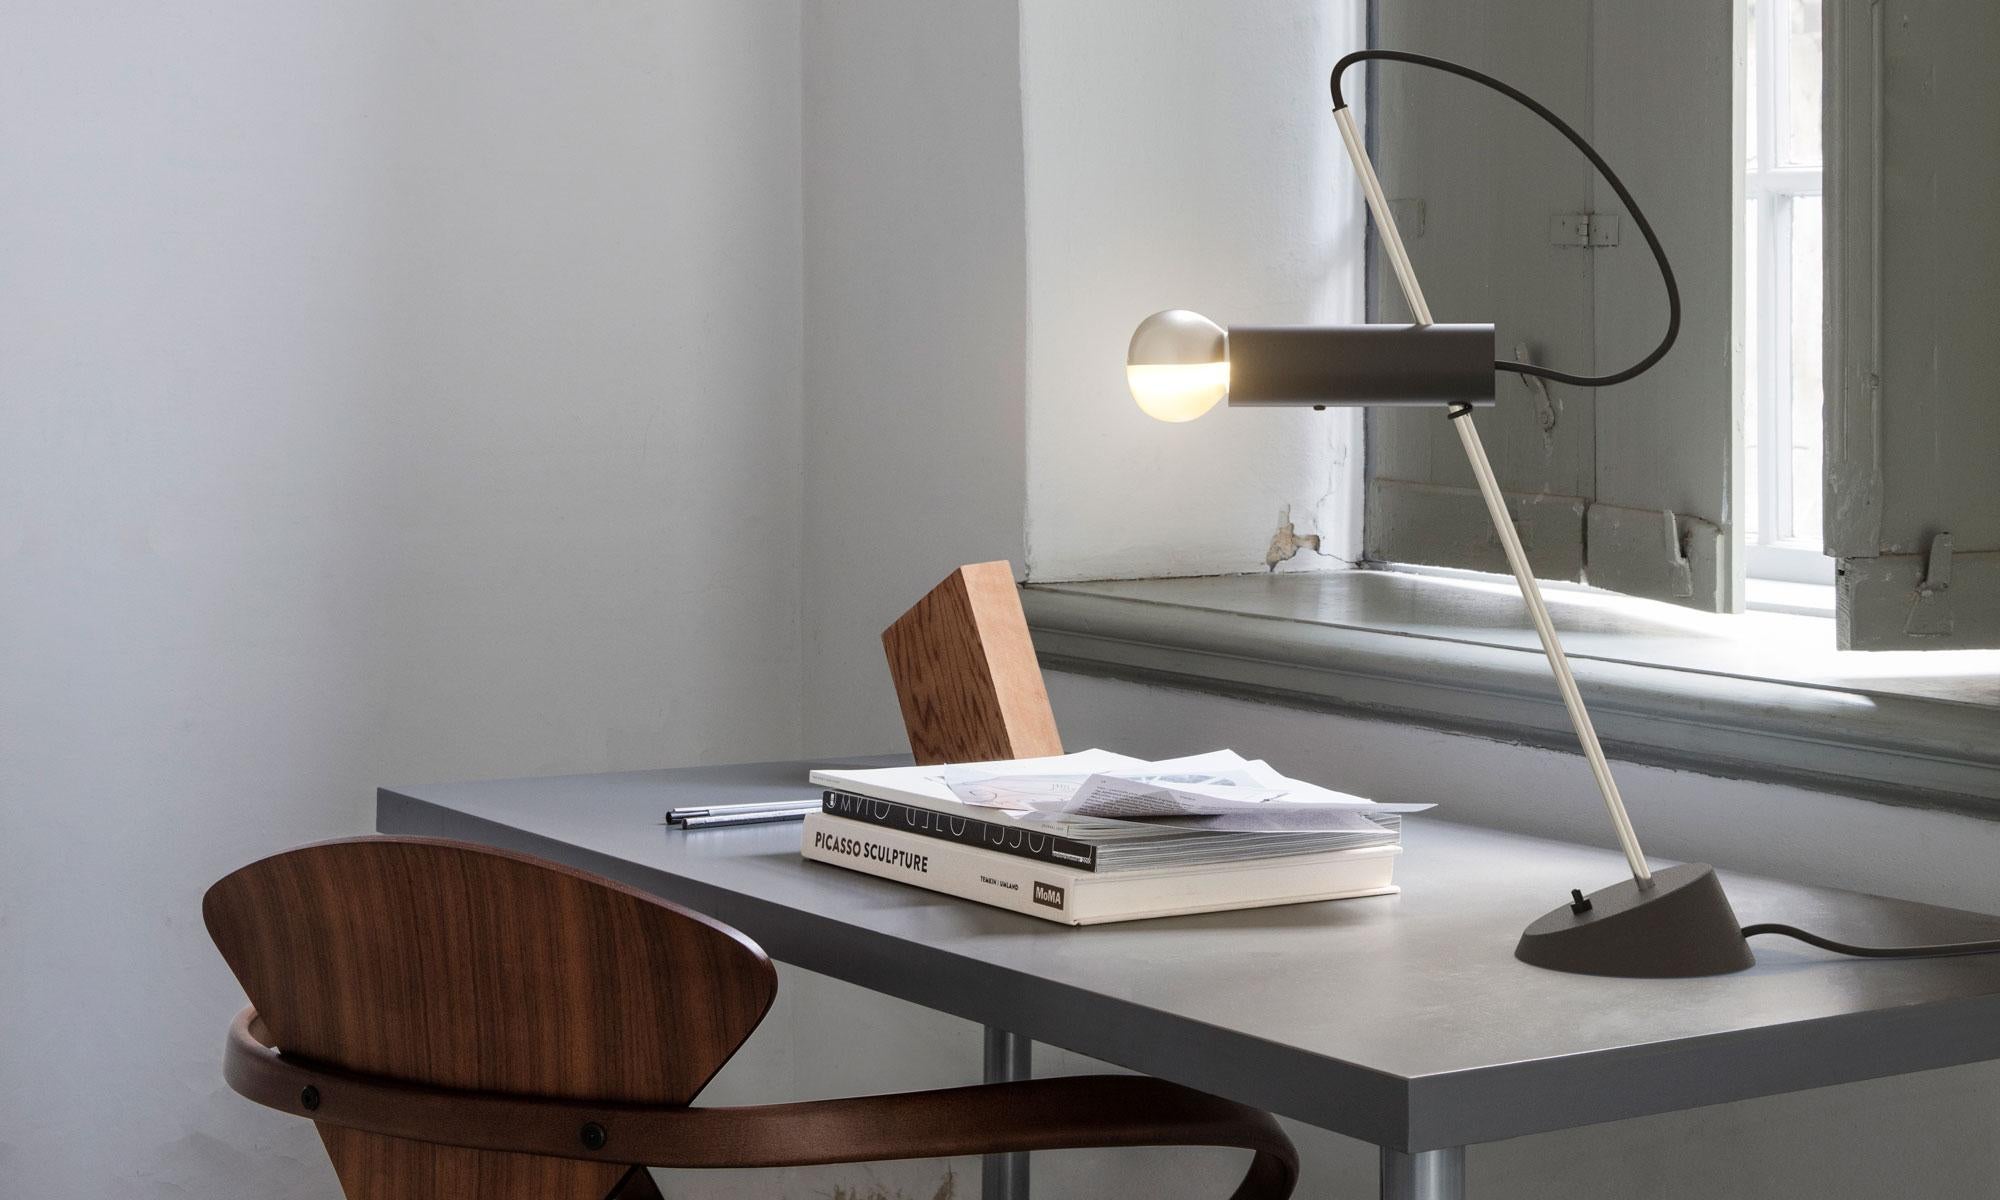 Model 566 table lamp by Gino Sarfatti. Originally designed in 1956. Current production manufactured by Astep. the Model 566 embodies Gino Sarfatti’s reductive process, resulting in a balanced elemental form. The Luminaire stands poised, with implied